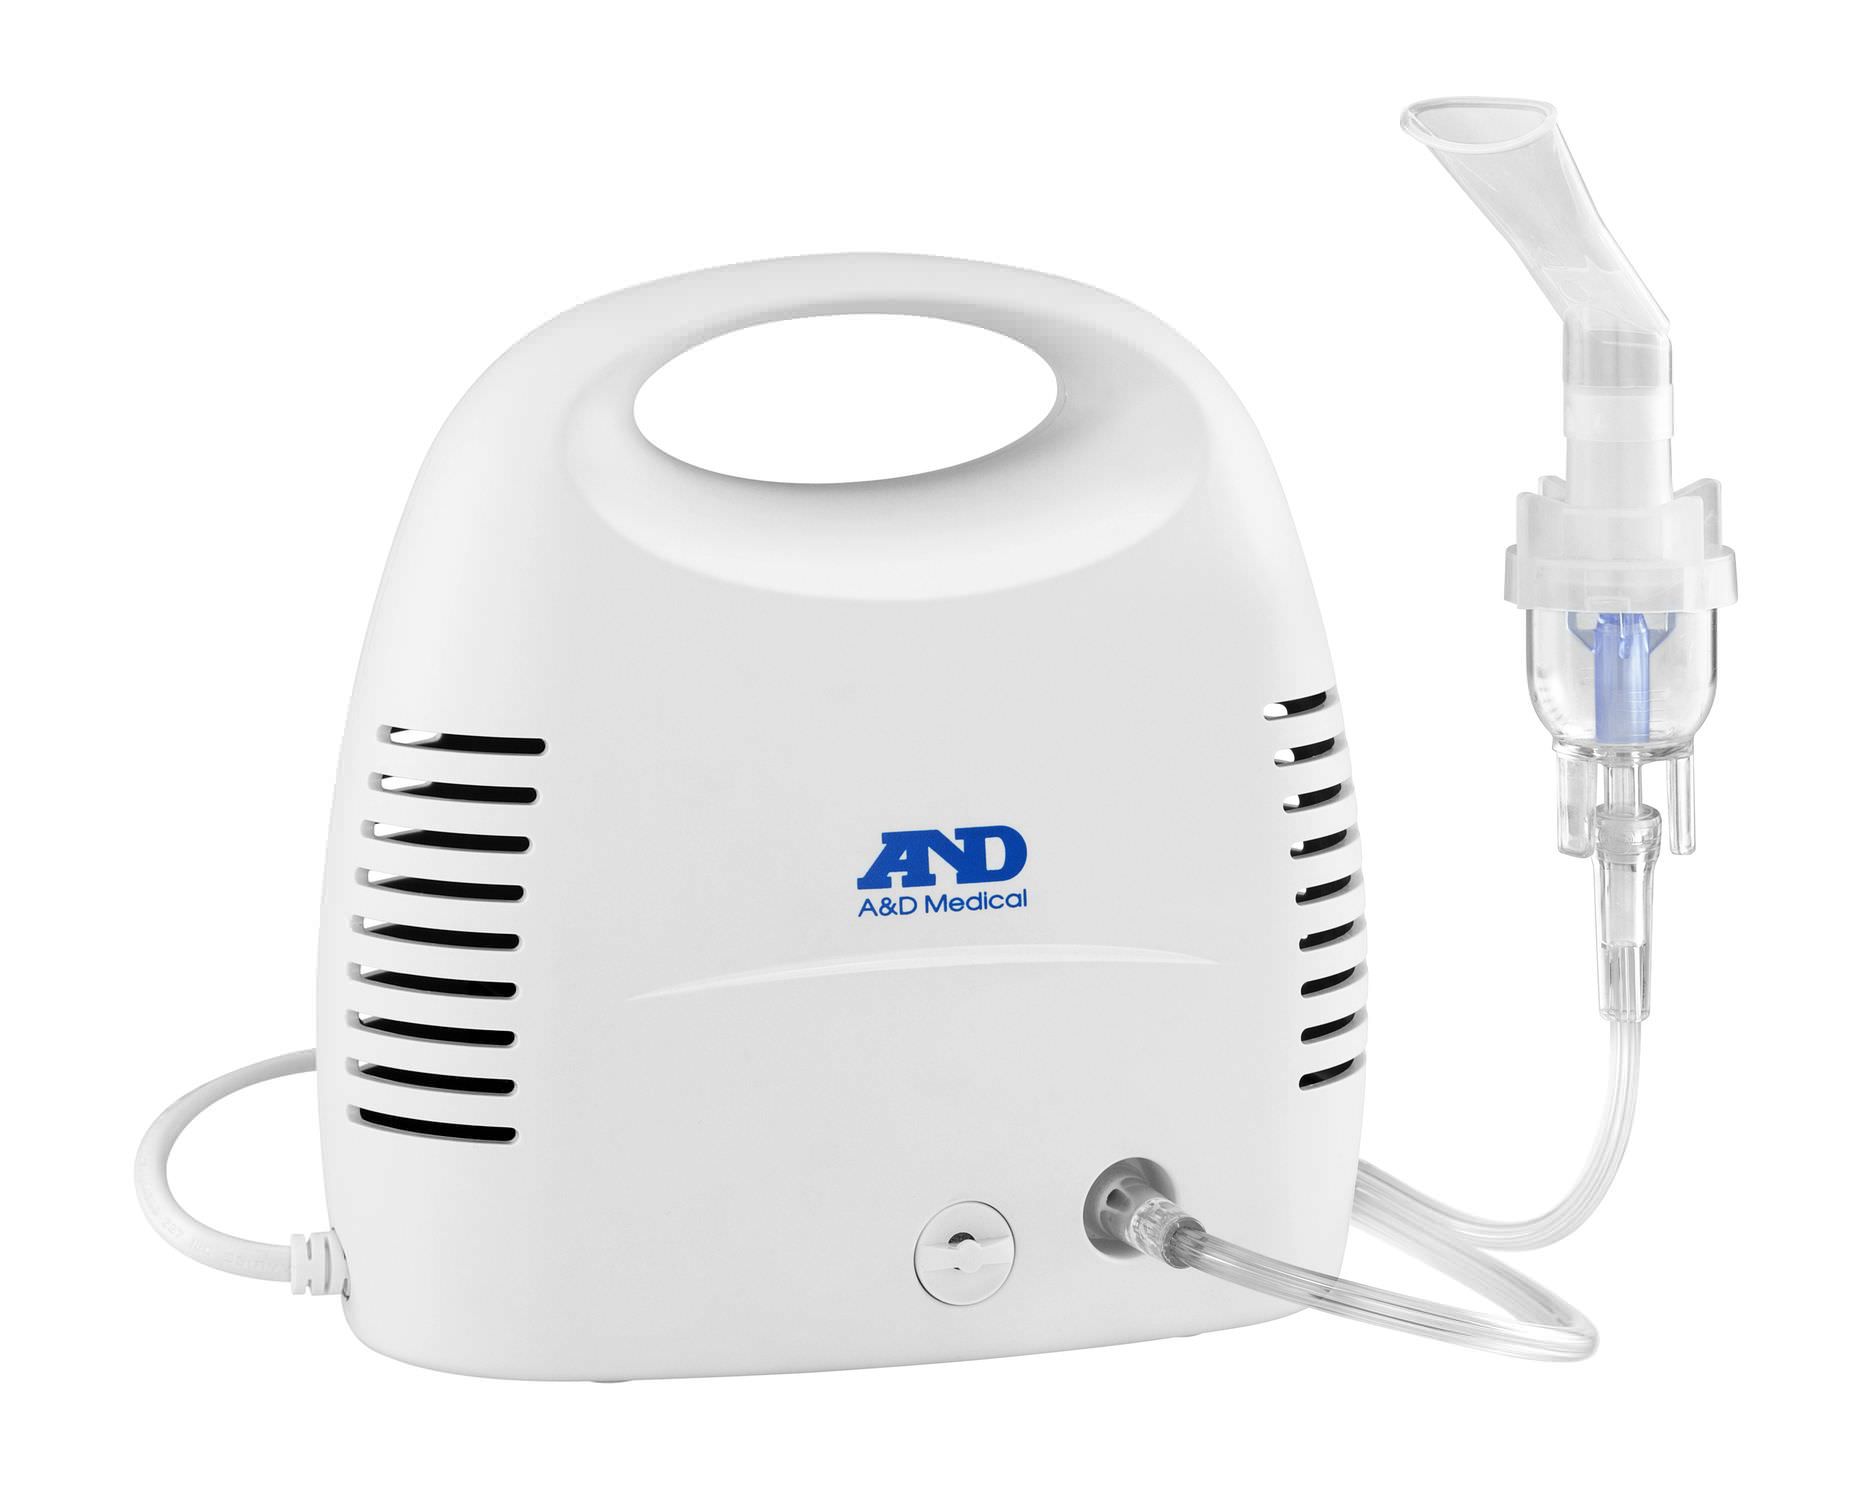 Pneumatic nebulizer / with mask / with compressor UN-011 A&D Company, Limited